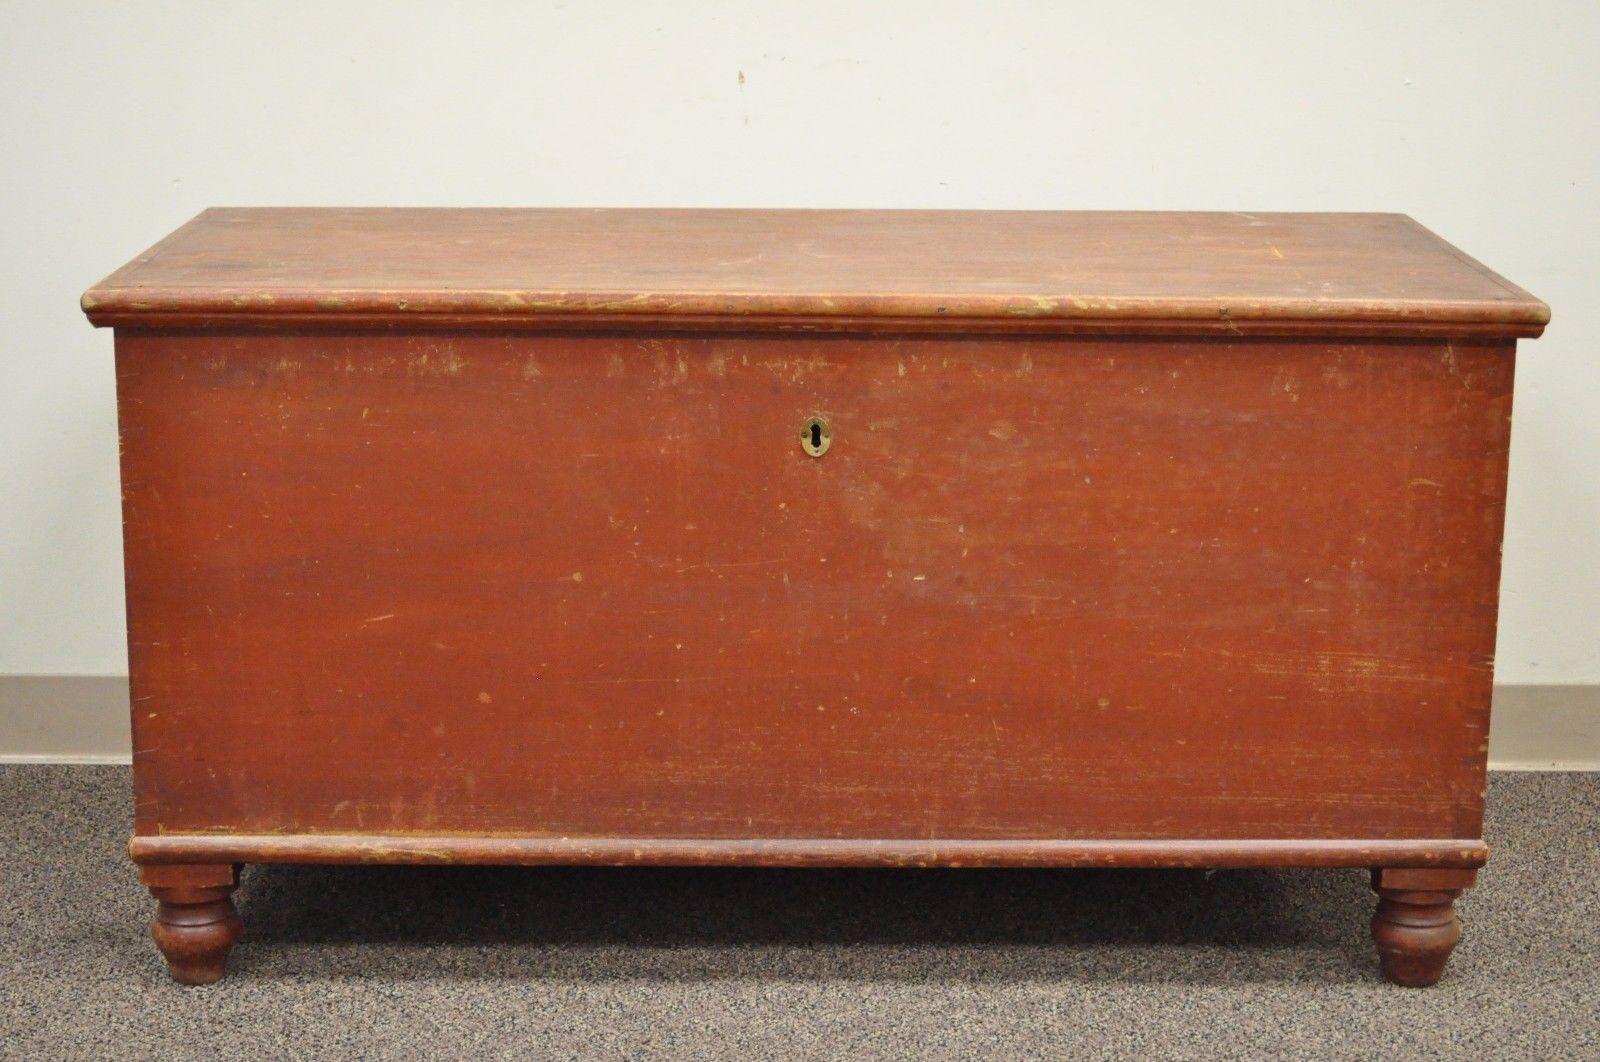 Antique hand dovetailed red painted primitive blanket chest from Pennsylvania. Item features hand dovetailed construction, distressed red paint, bun feet, authentic antique chest, circa late 19th century, PA. Measurements: 25.5